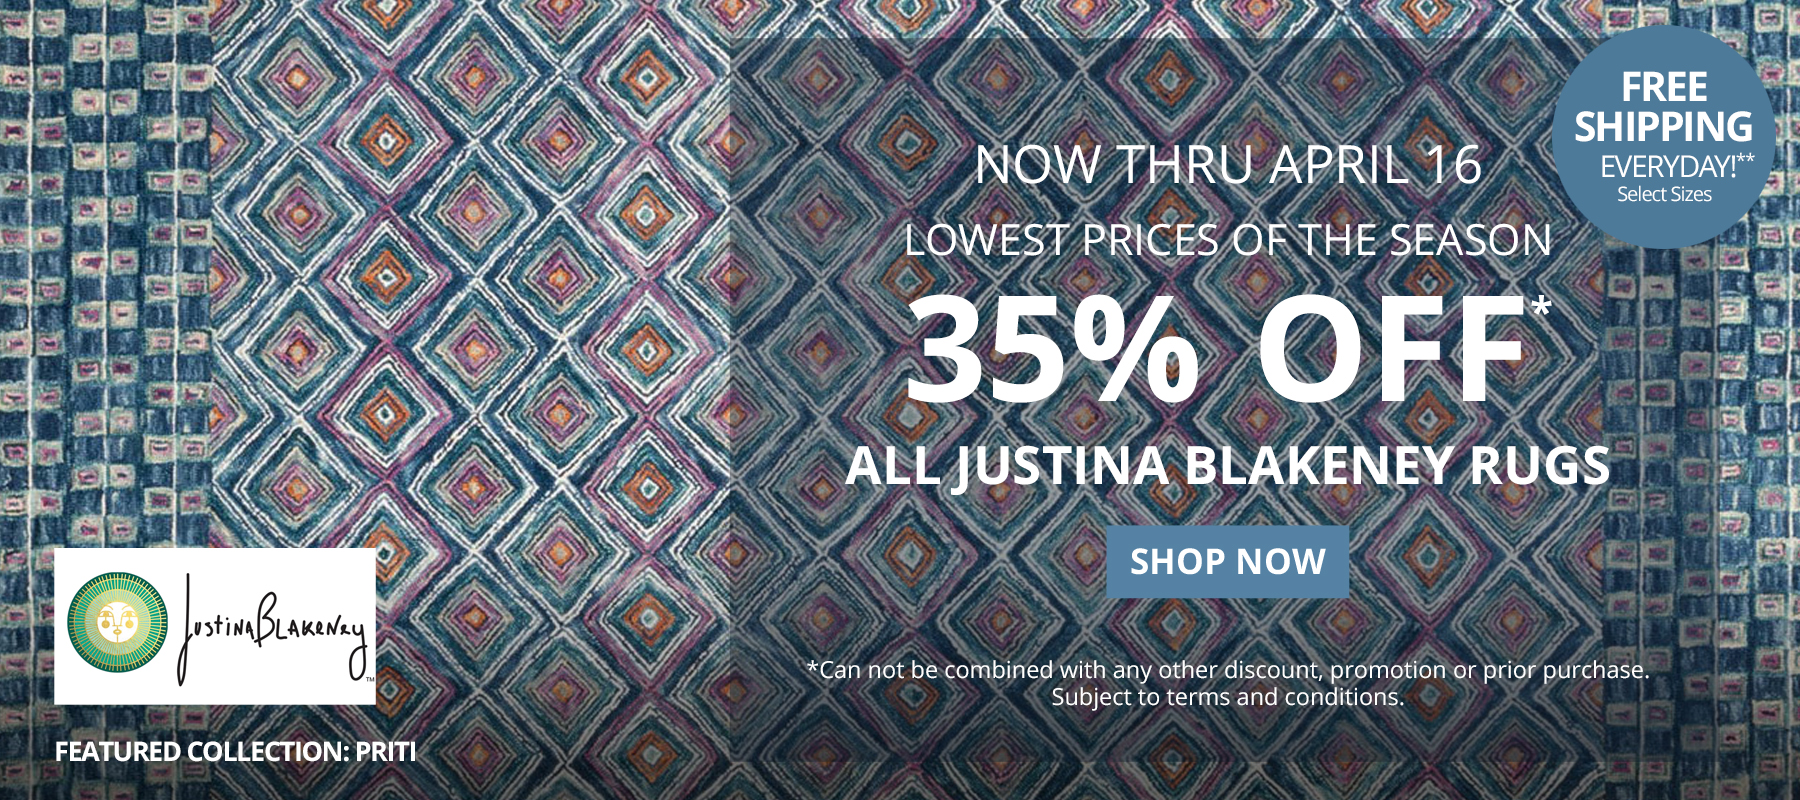 Now Thru April 16. Lowest Prices of the Season. 35% Off* All Justina Blakeney Rugs. Free Shipping Everyday!** Select Sizes. *Can not be combined with any other discount, promotion or prior purchase. Subject to terms and conditions. Shop Now.